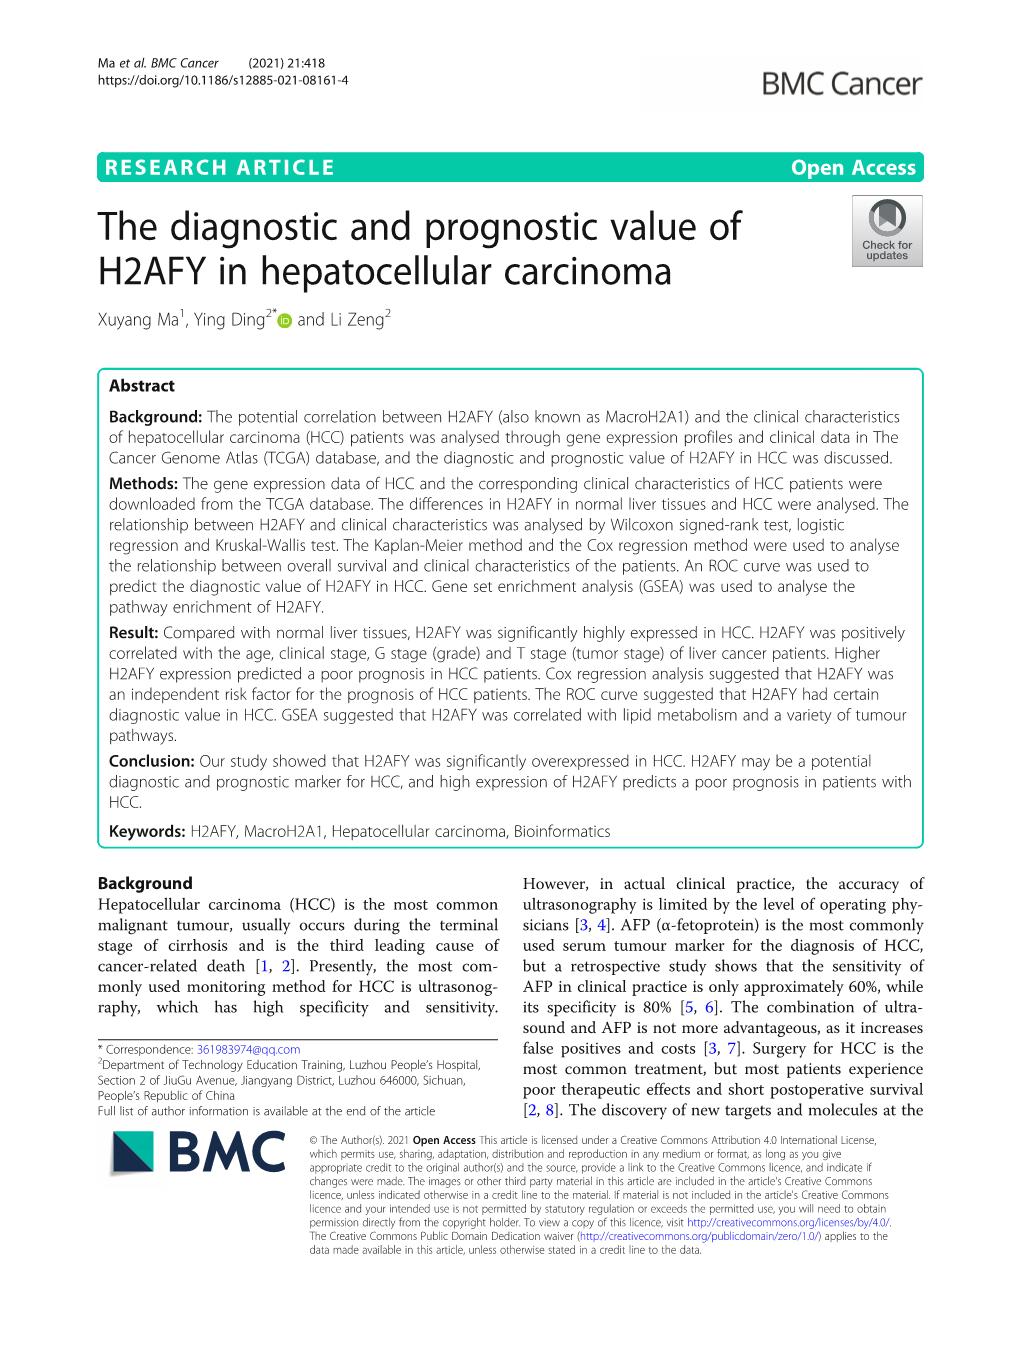 The Diagnostic and Prognostic Value of H2AFY in Hepatocellular Carcinoma Xuyang Ma1, Ying Ding2* and Li Zeng2